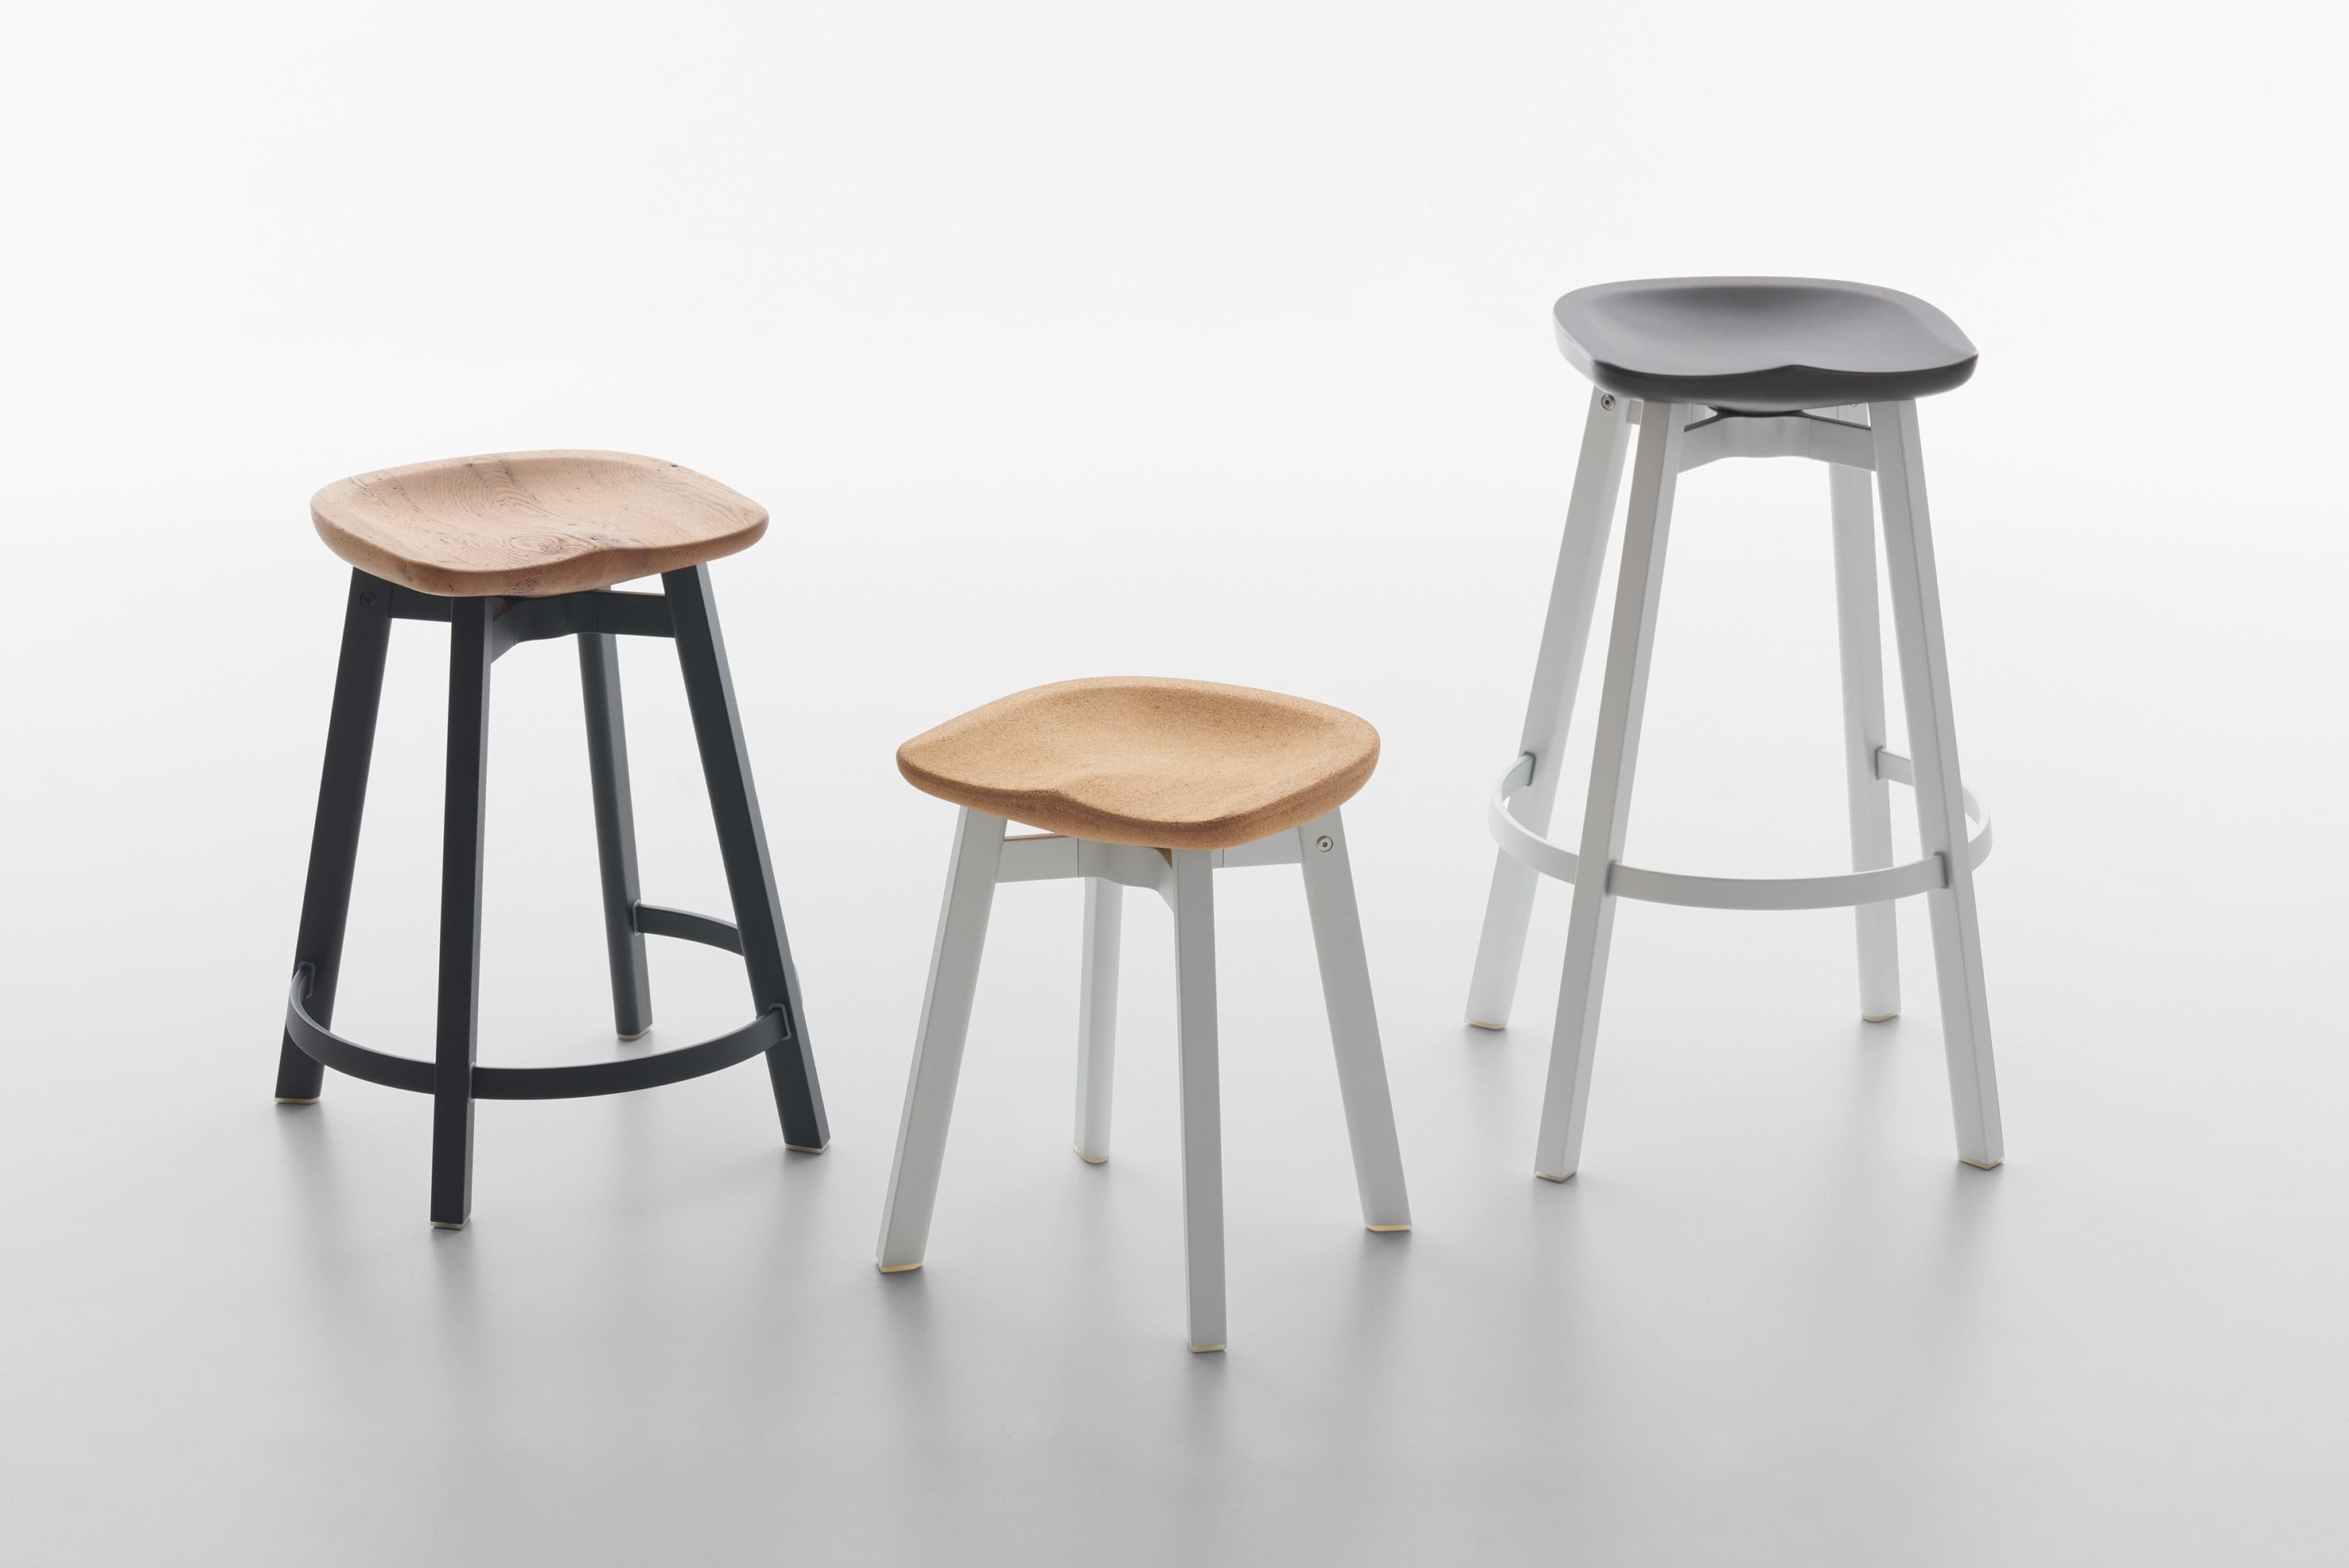 Modern Emeco Su Small Stool in Wood w/ Red Seat by Nendo